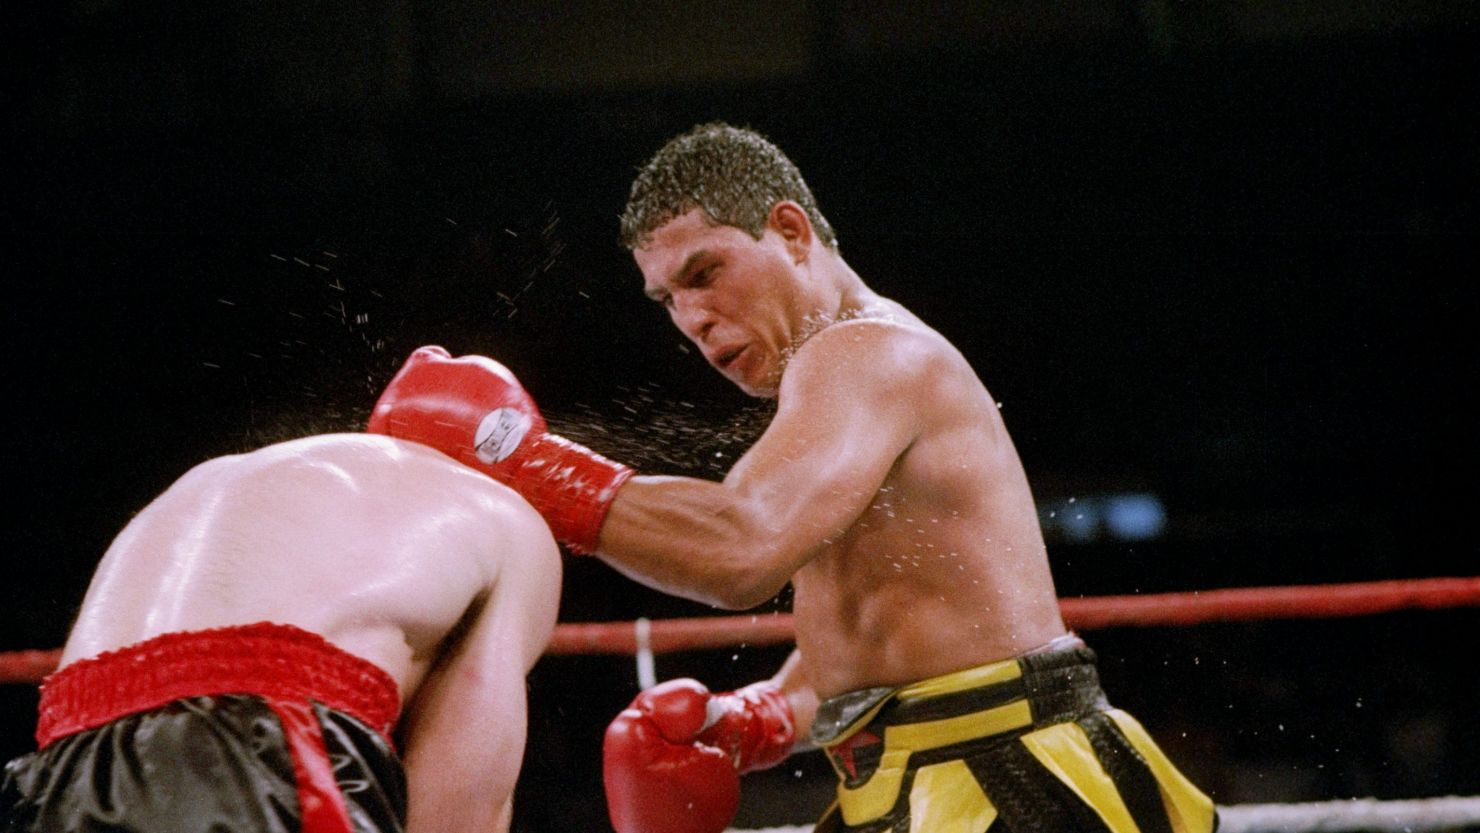 19 Jun 1993: Hector Camacho, right, lands a punch on opponent Tom Alexander in a 1993 match.